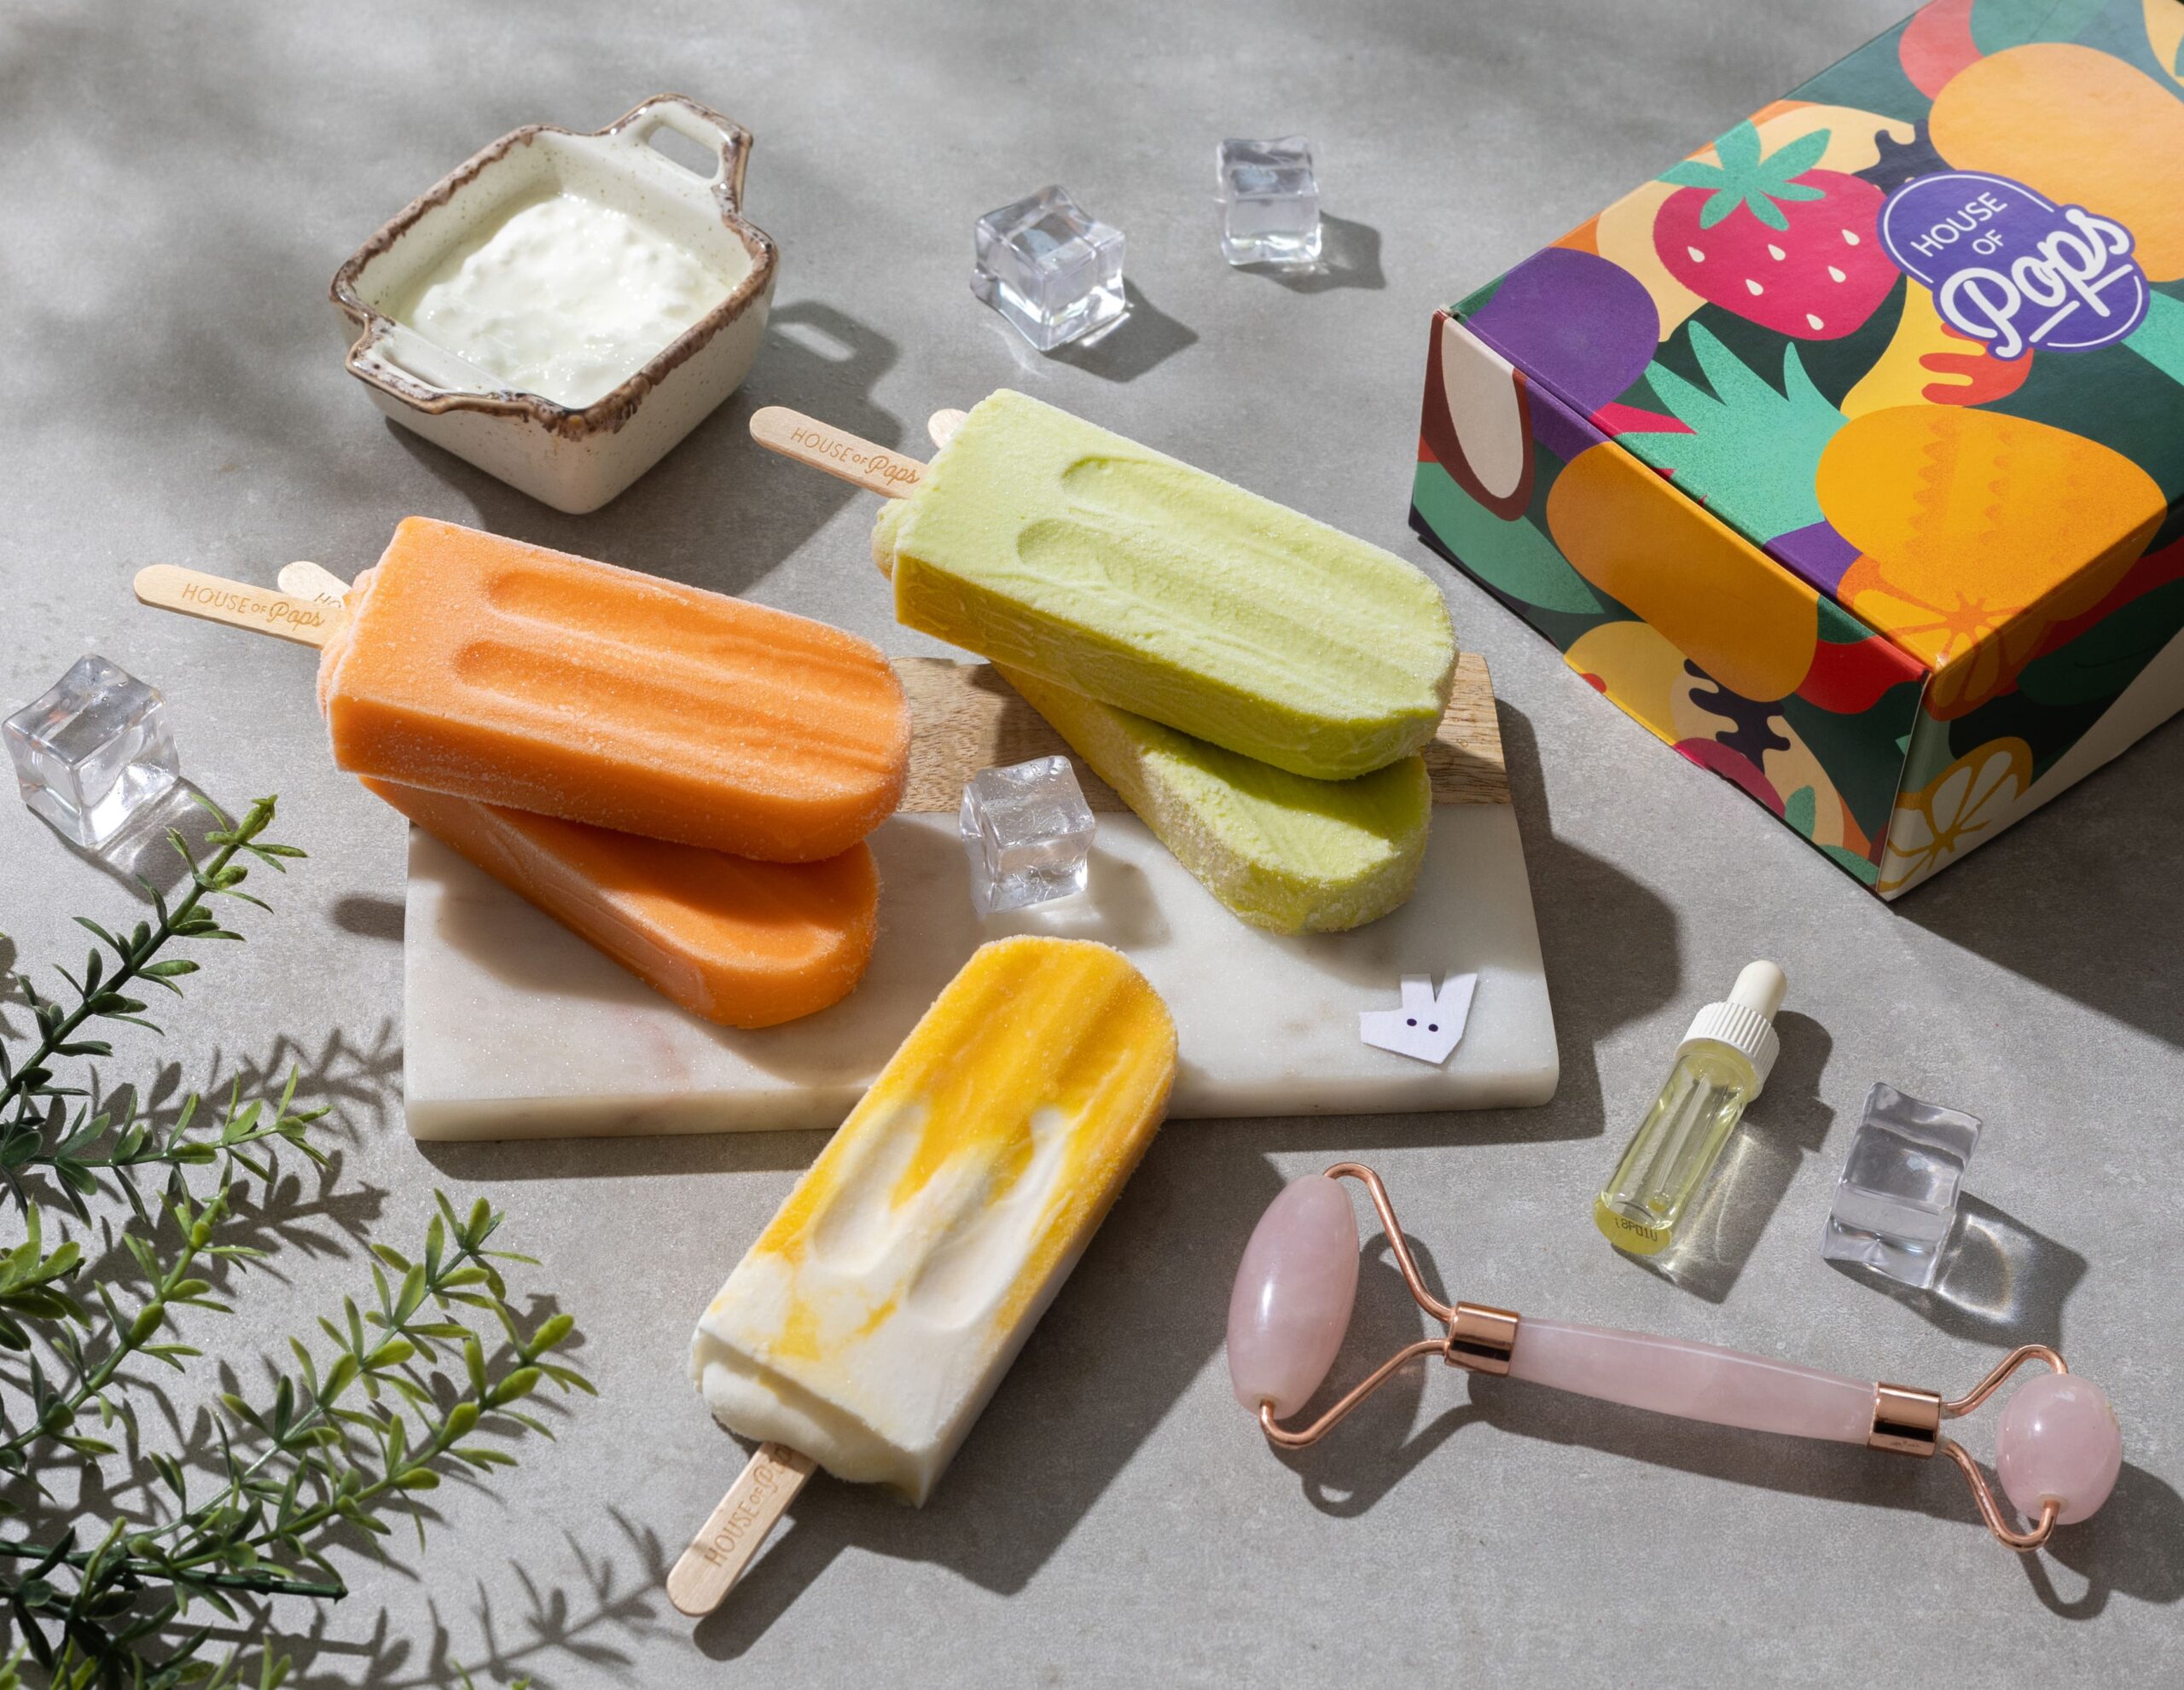 DELIVEROO AND HOUSE OF POPS LAUNCH THE UAE'S FIRST-EVER EDIBLE BEAUTY ...